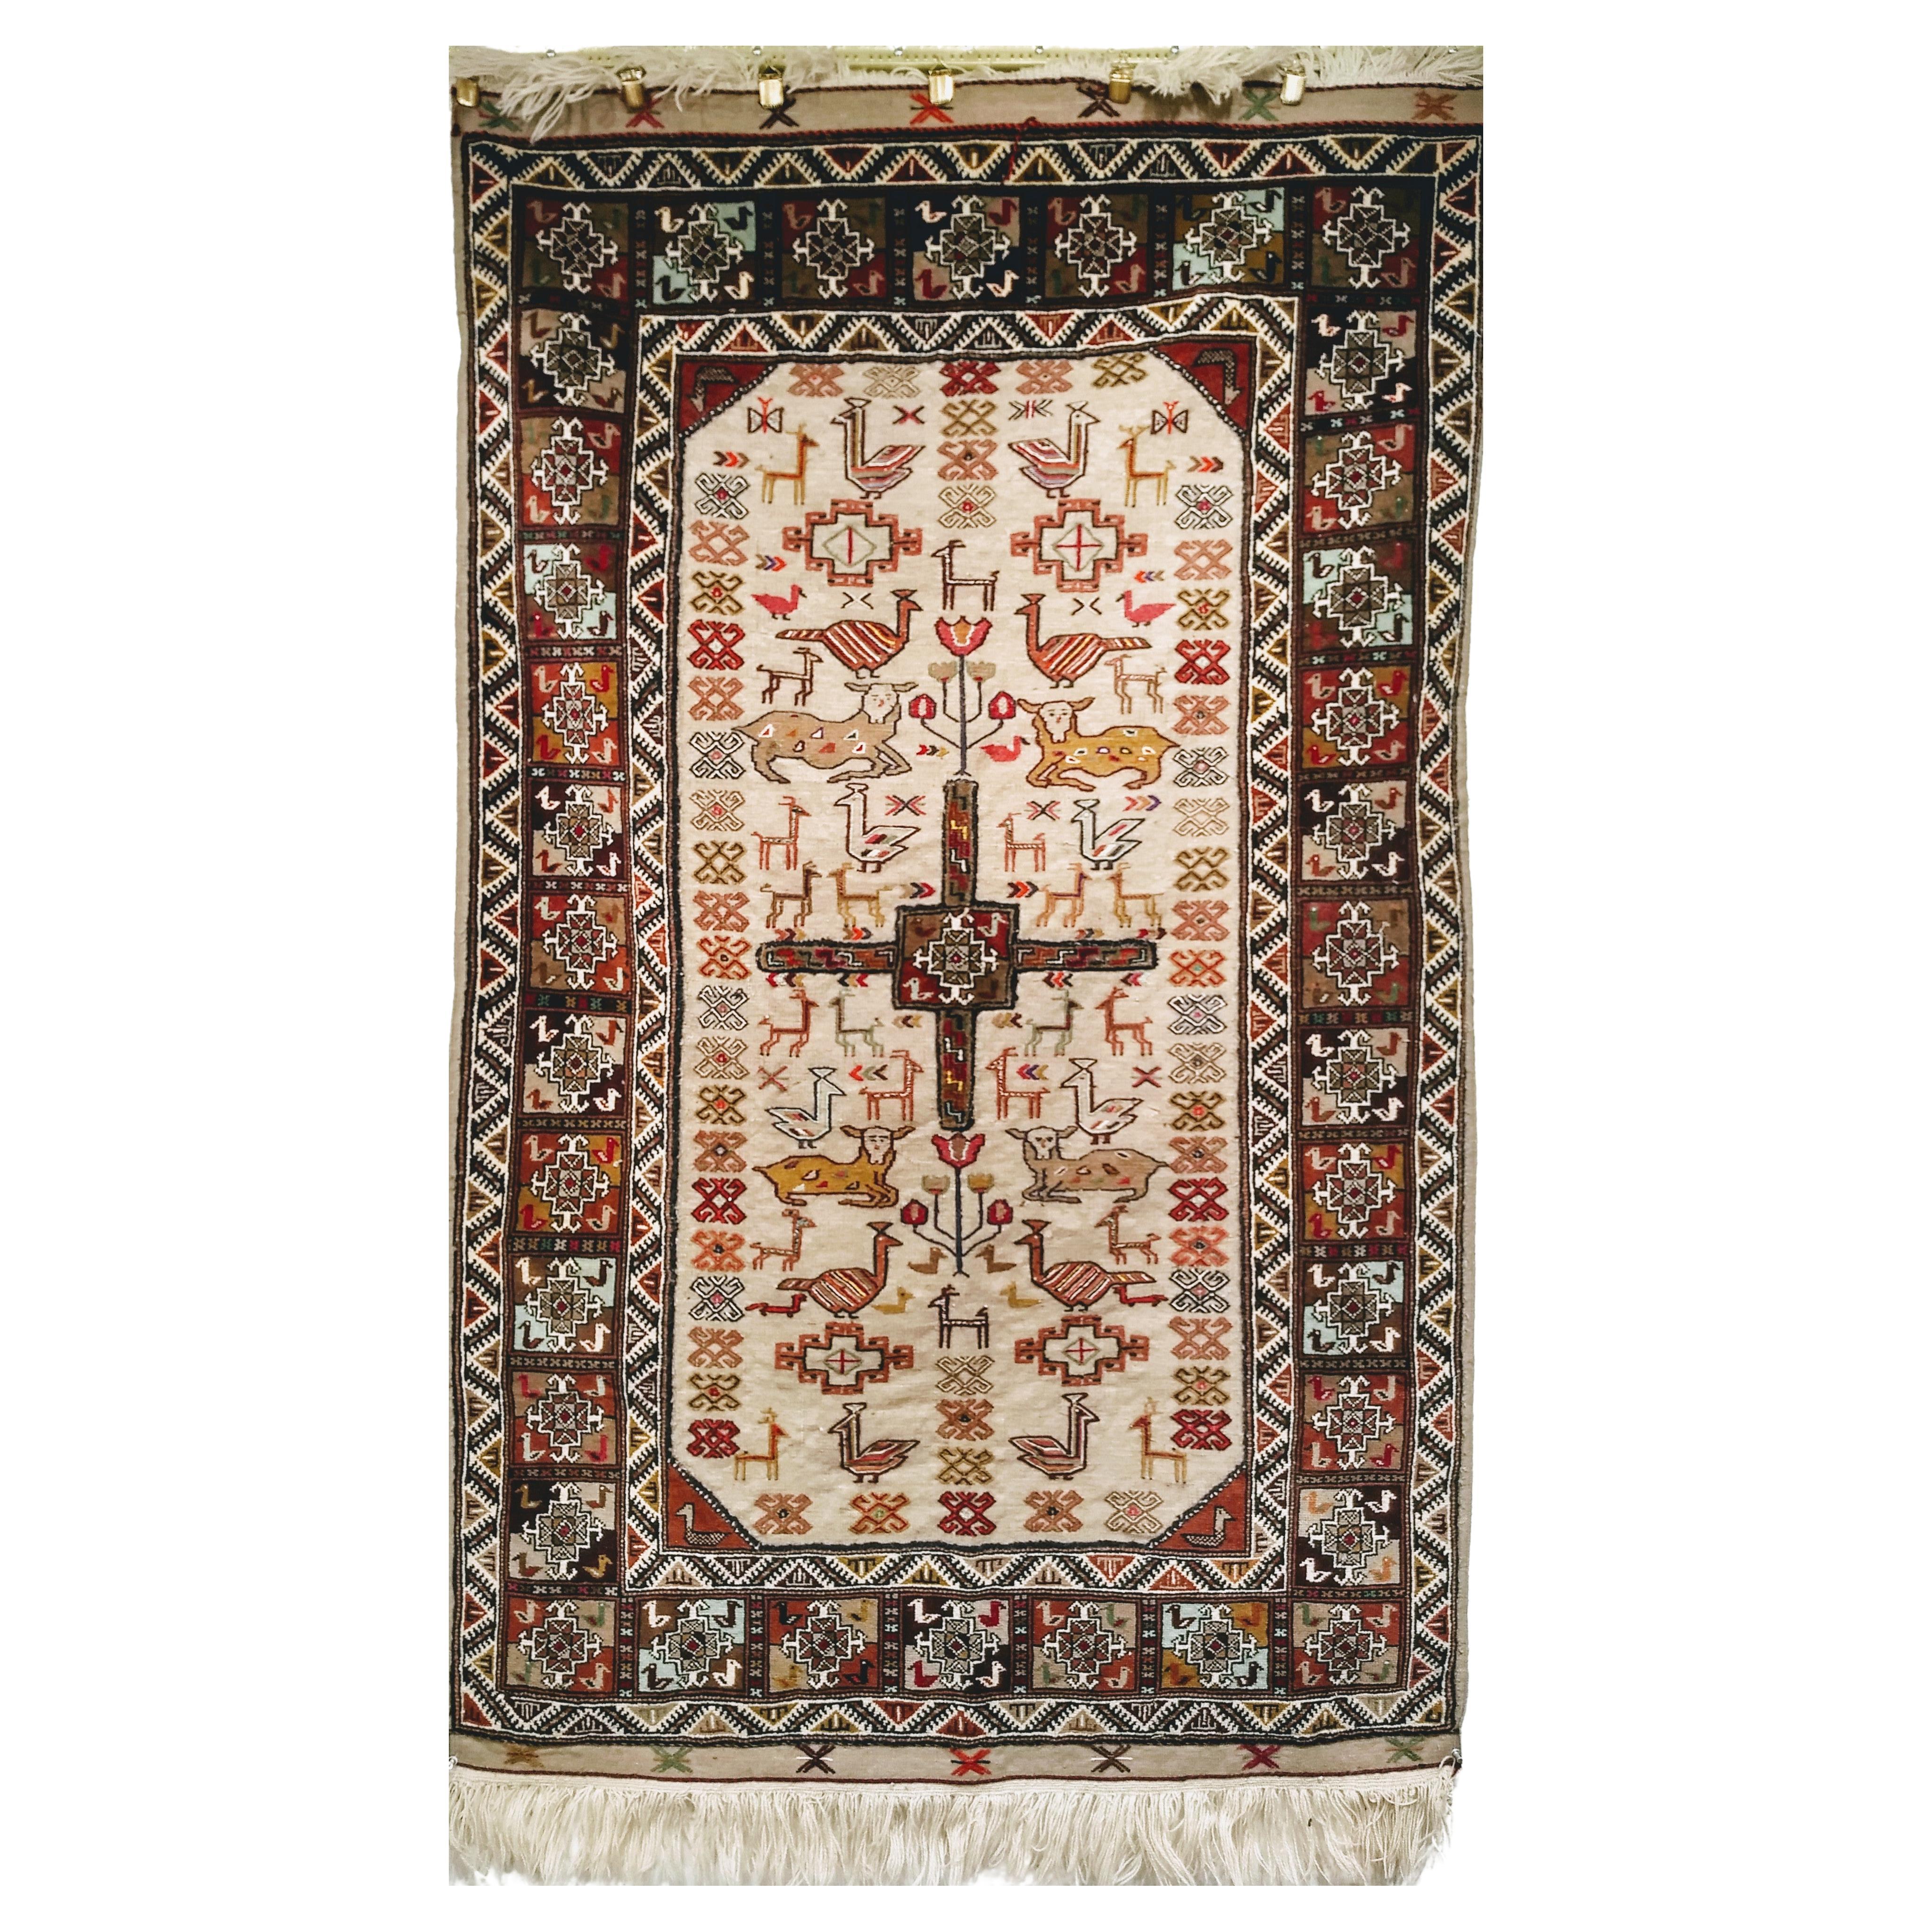 Vintage Hand-Woven Persian Qashqai Tribal Tapestry in Tree of Life Pattern